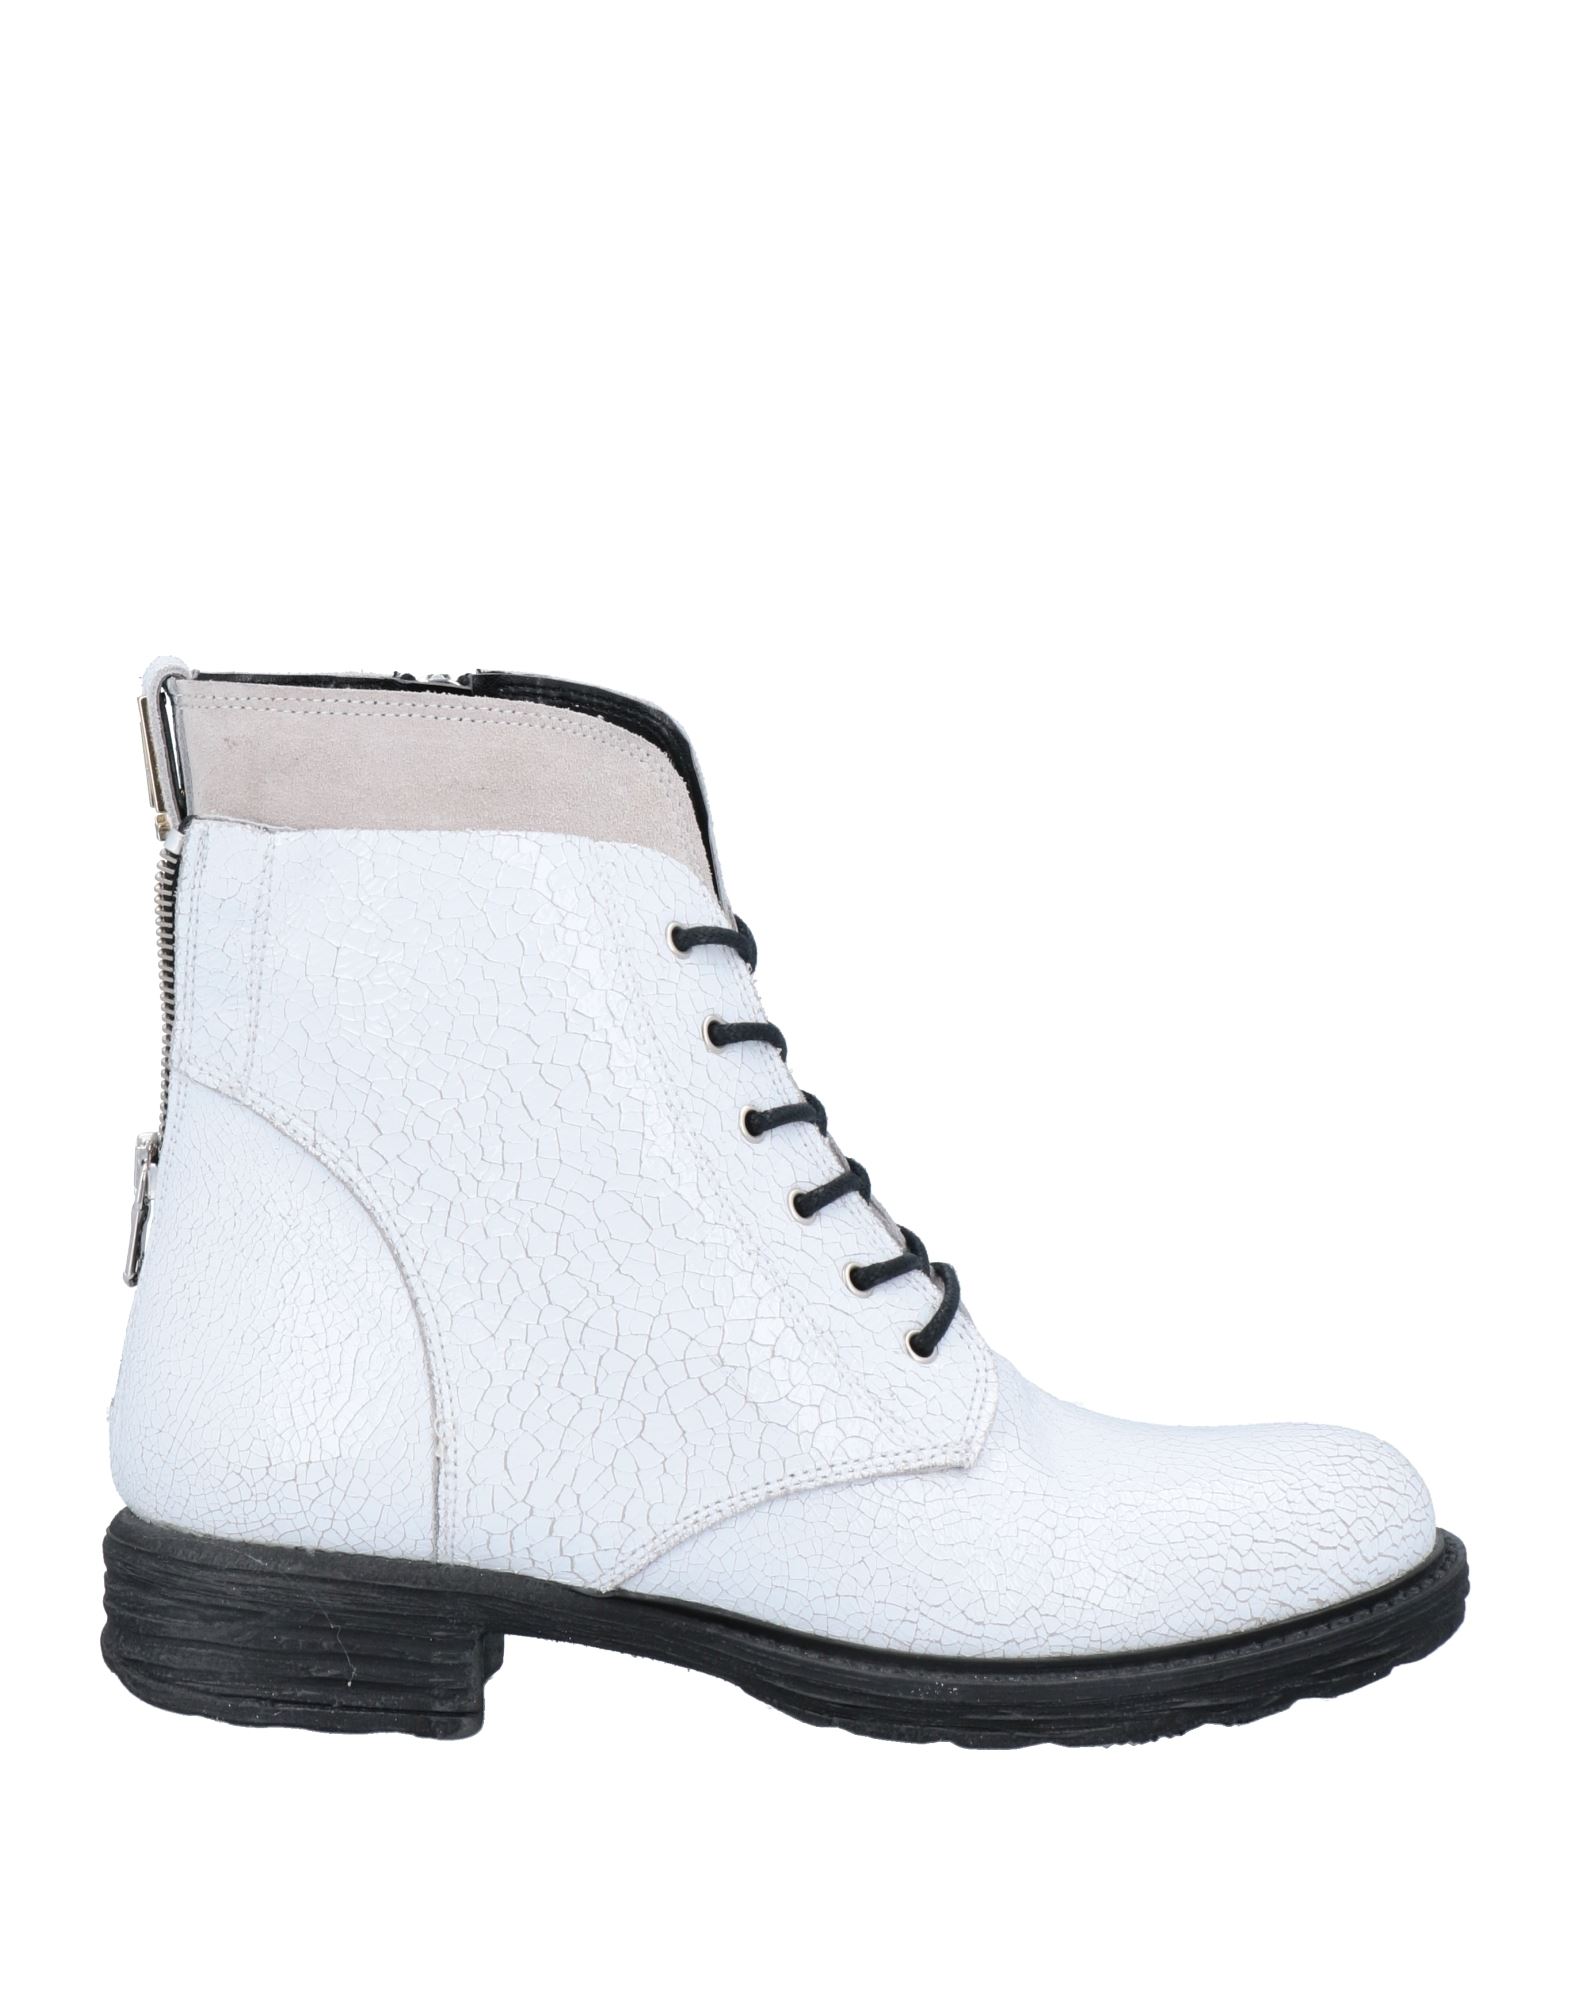 Aniye By Ankle Boots In White